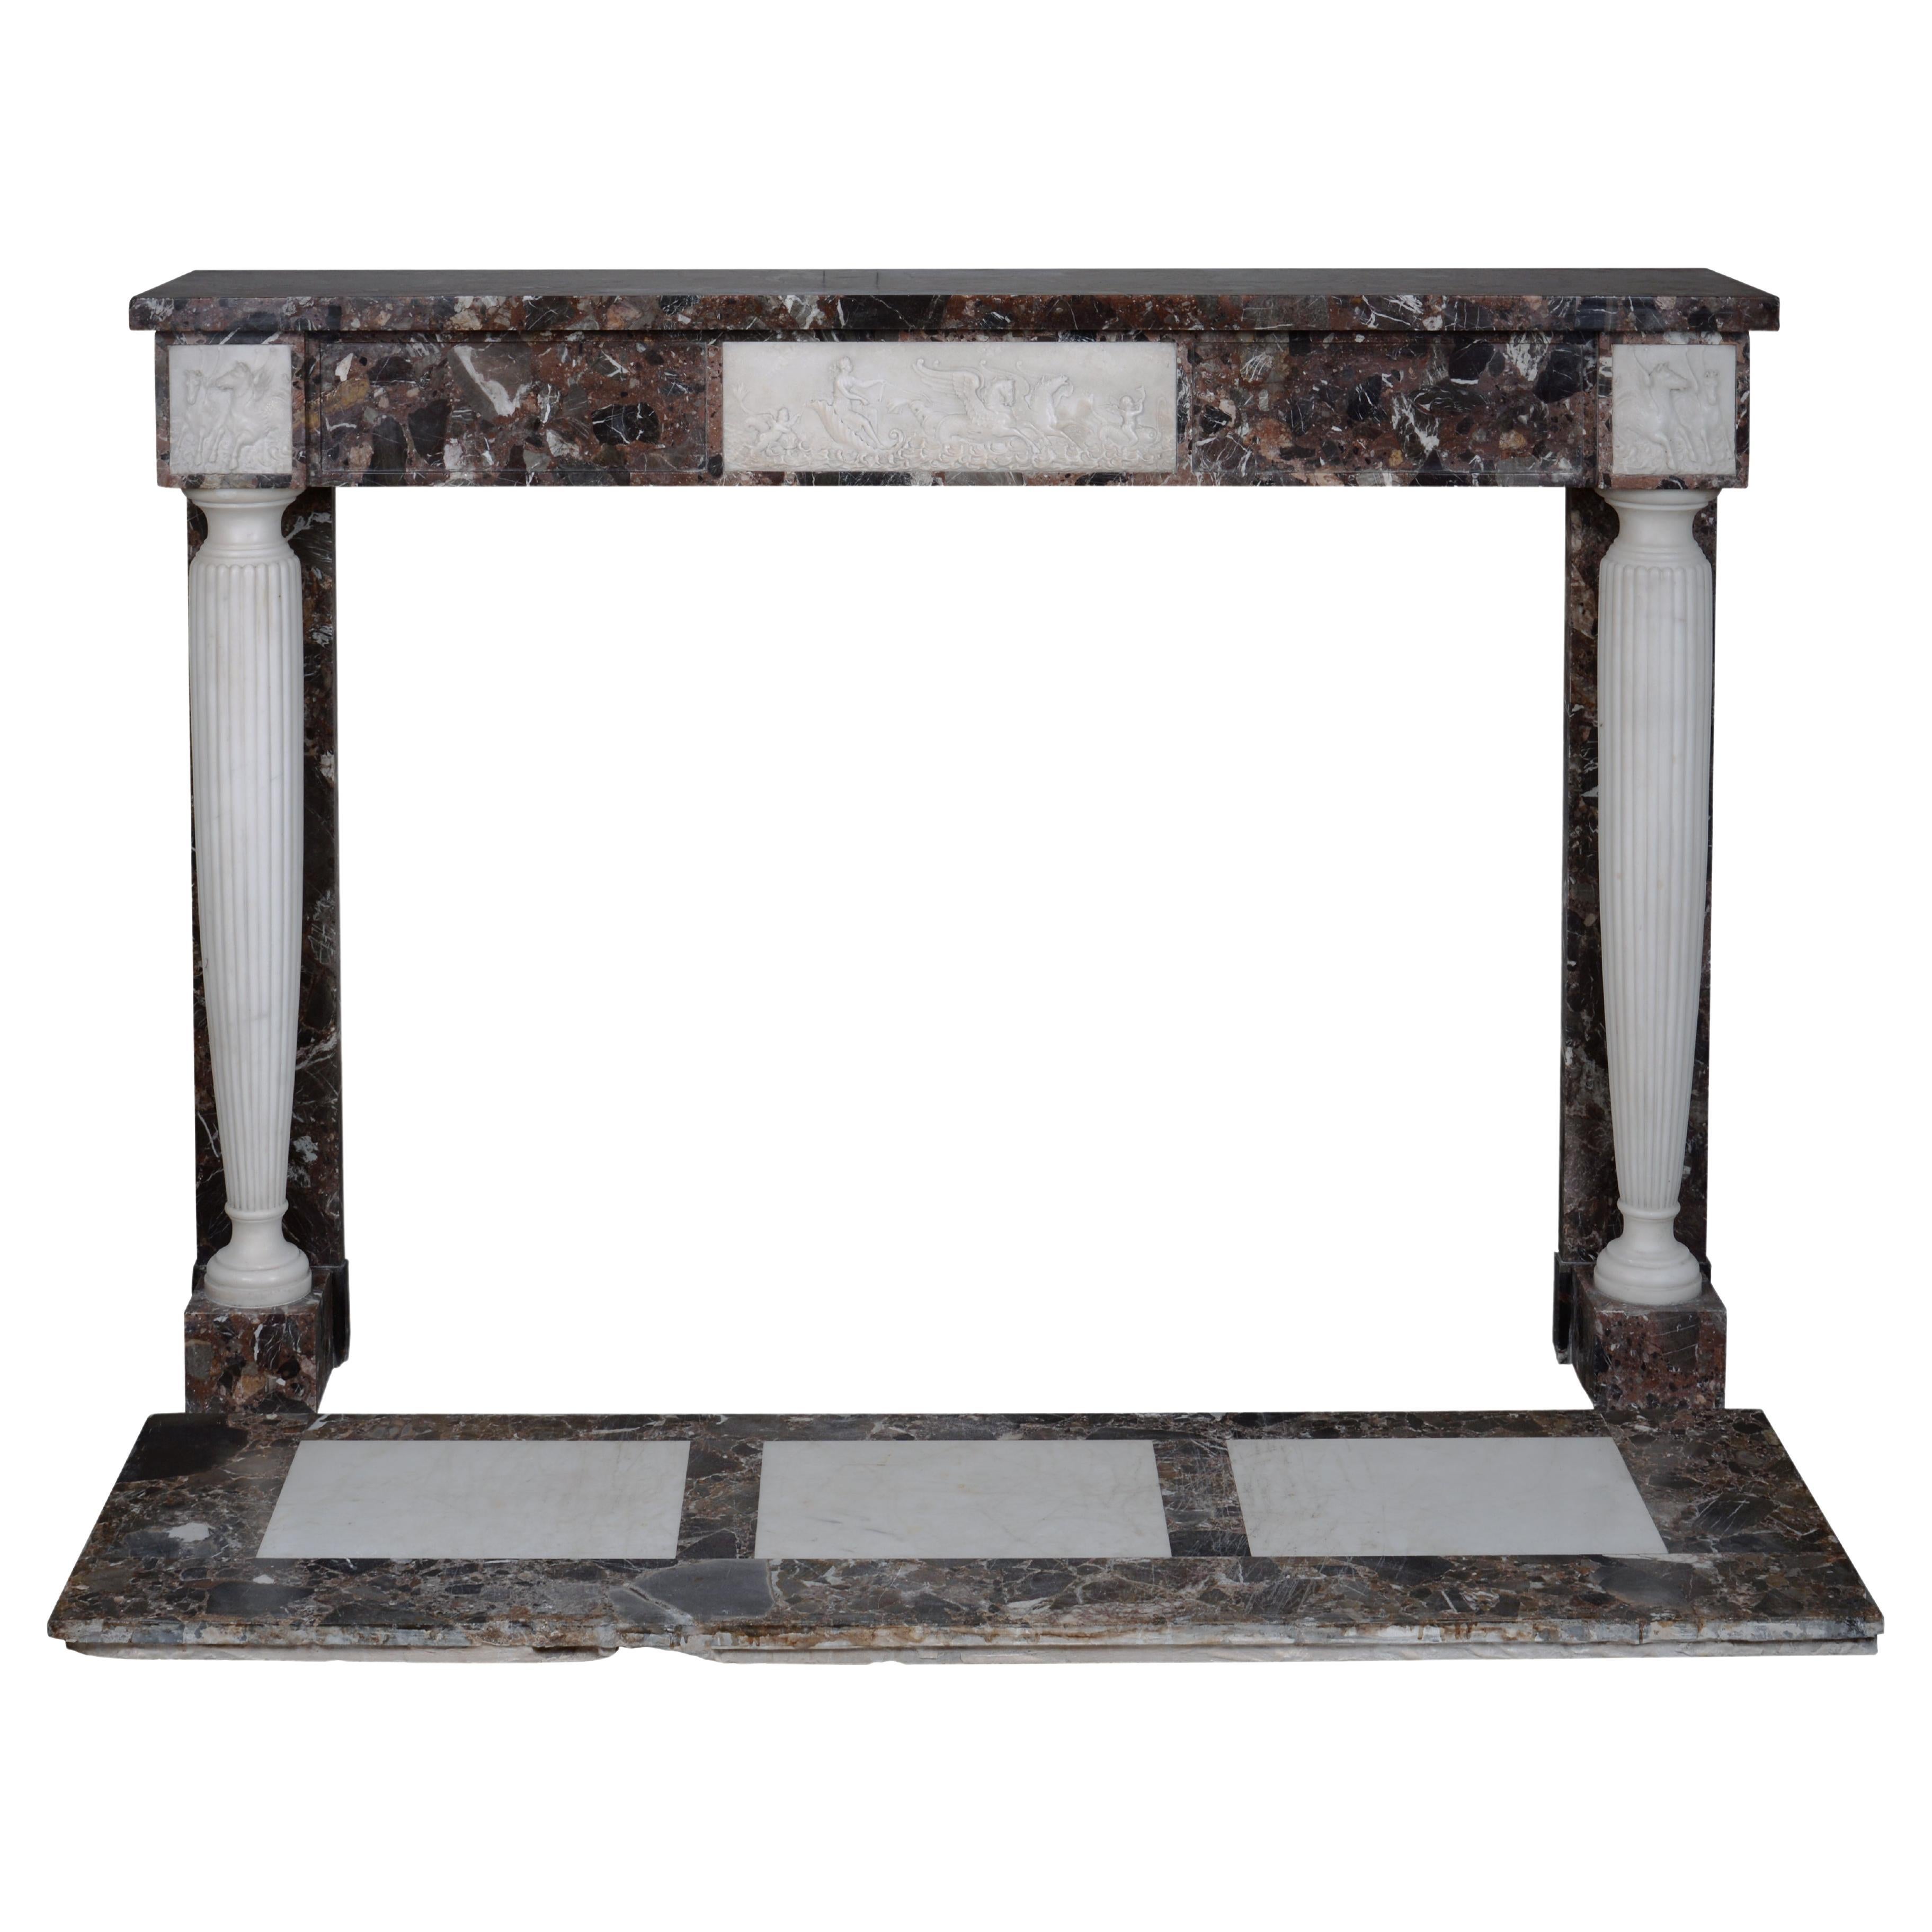 Neo Louis XVI Style Fireplace in Imperator and Statuary Marble For Sale